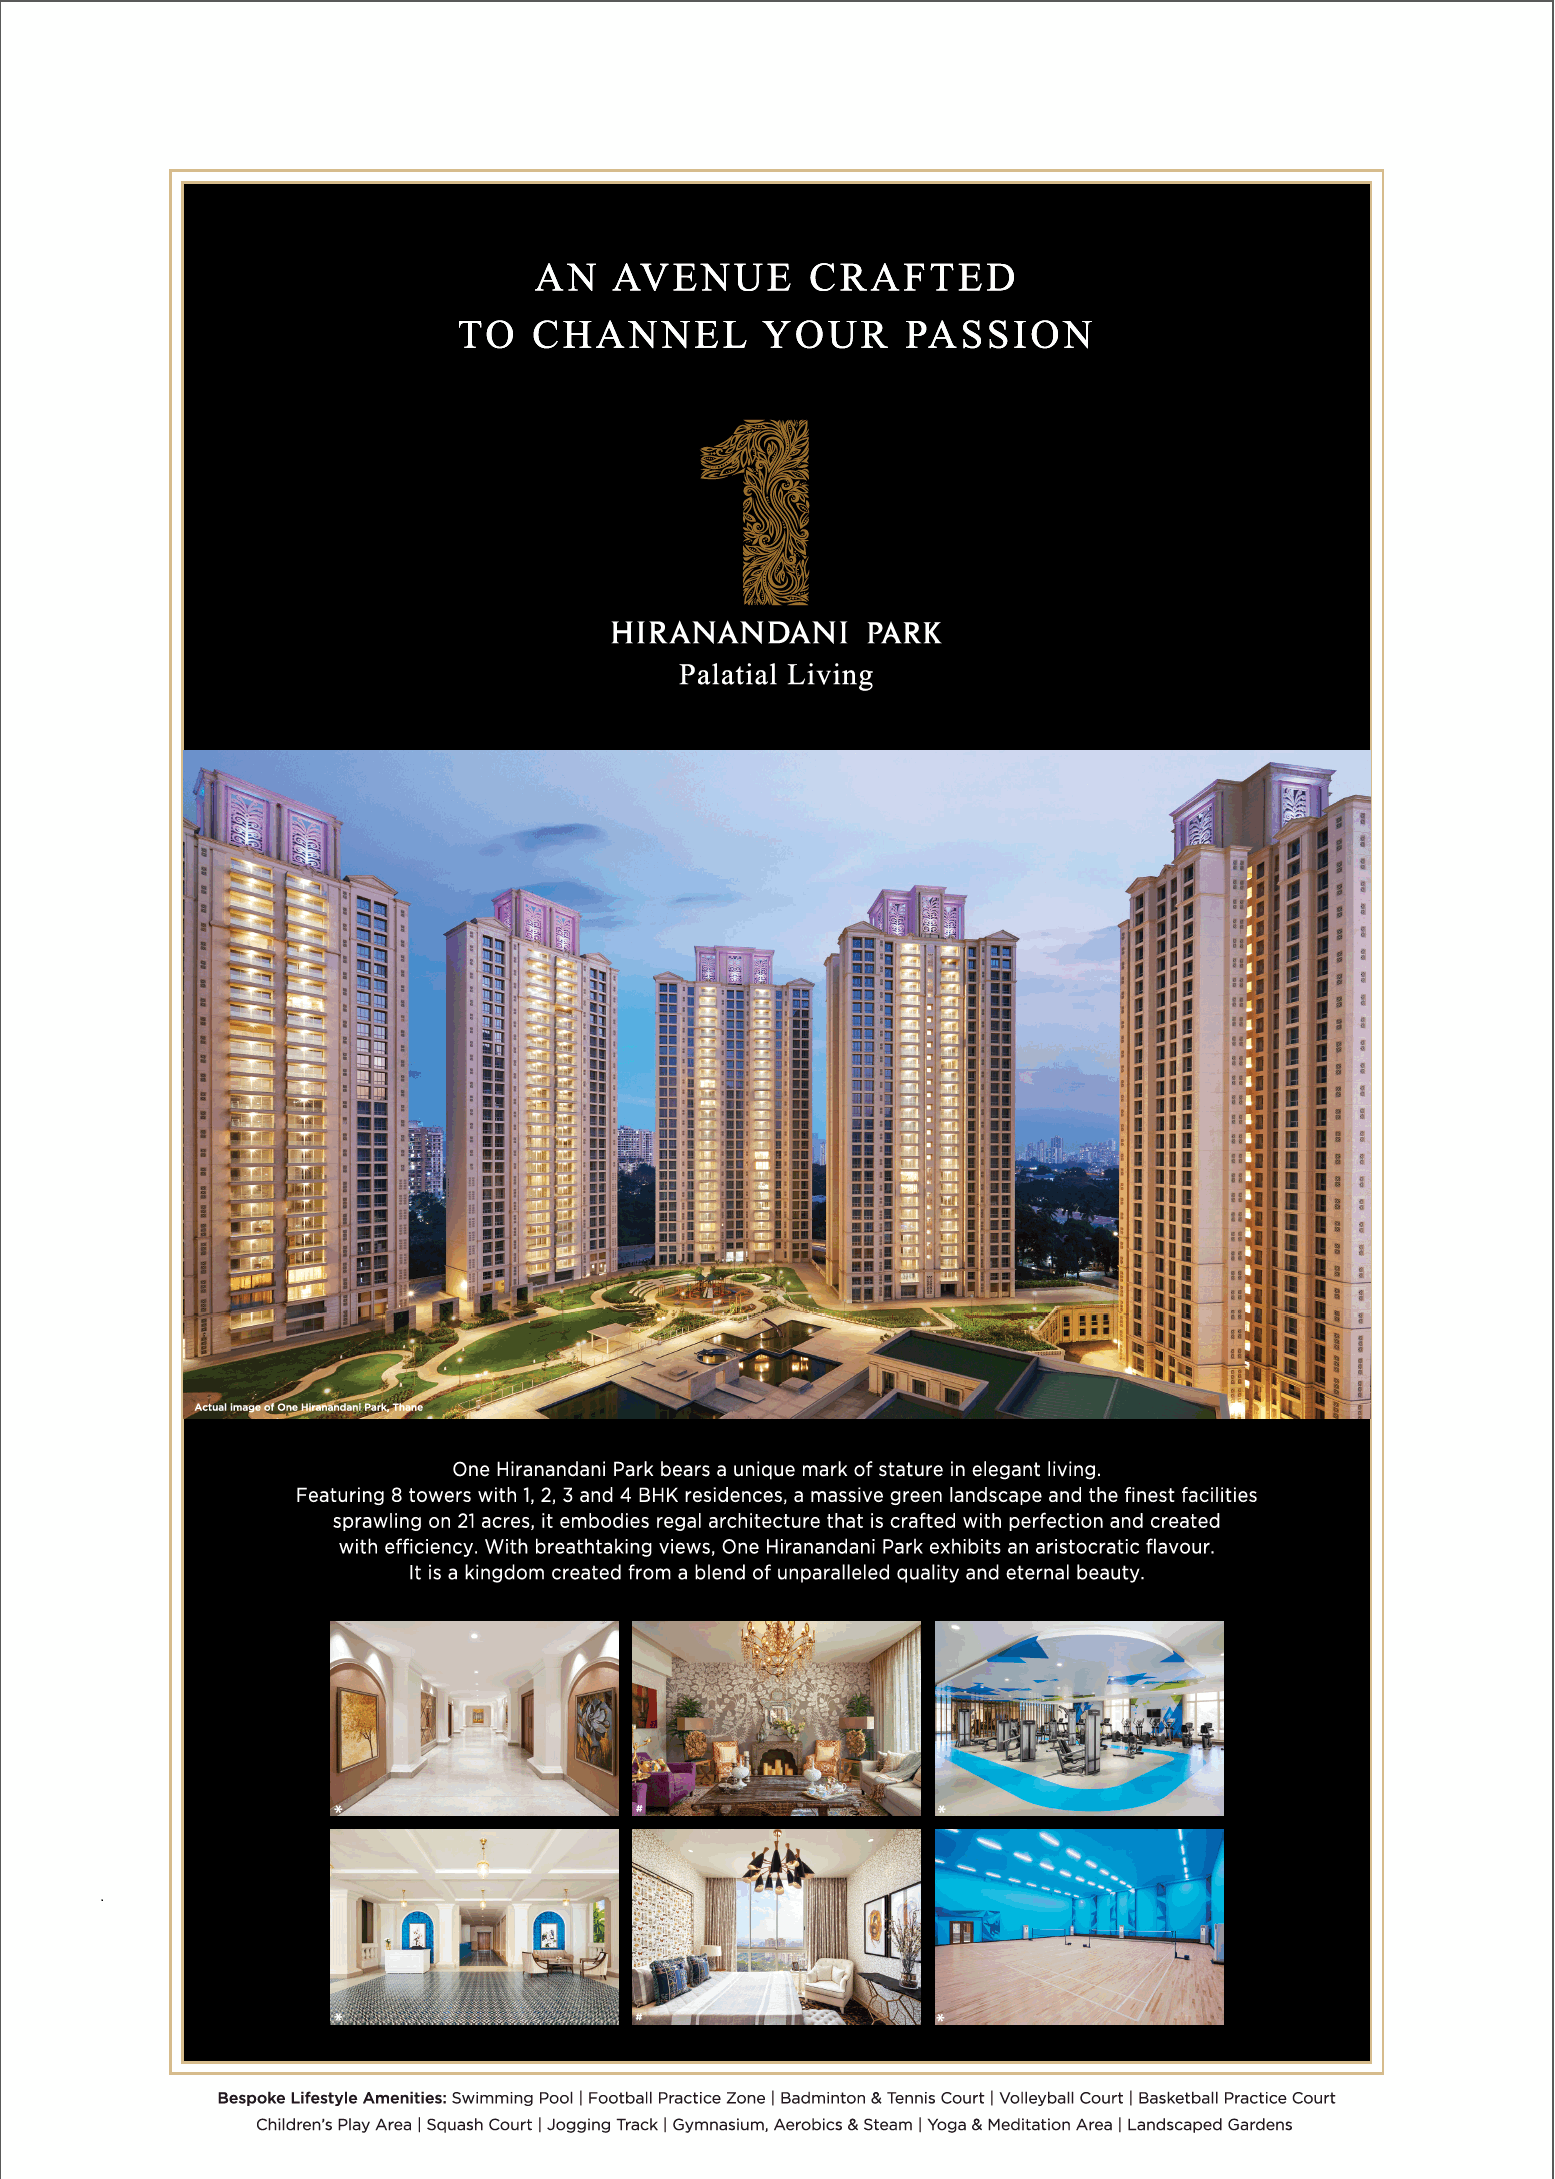 An avenue crafted to channel your passion is One Hiranandani Park, Mumbai Update